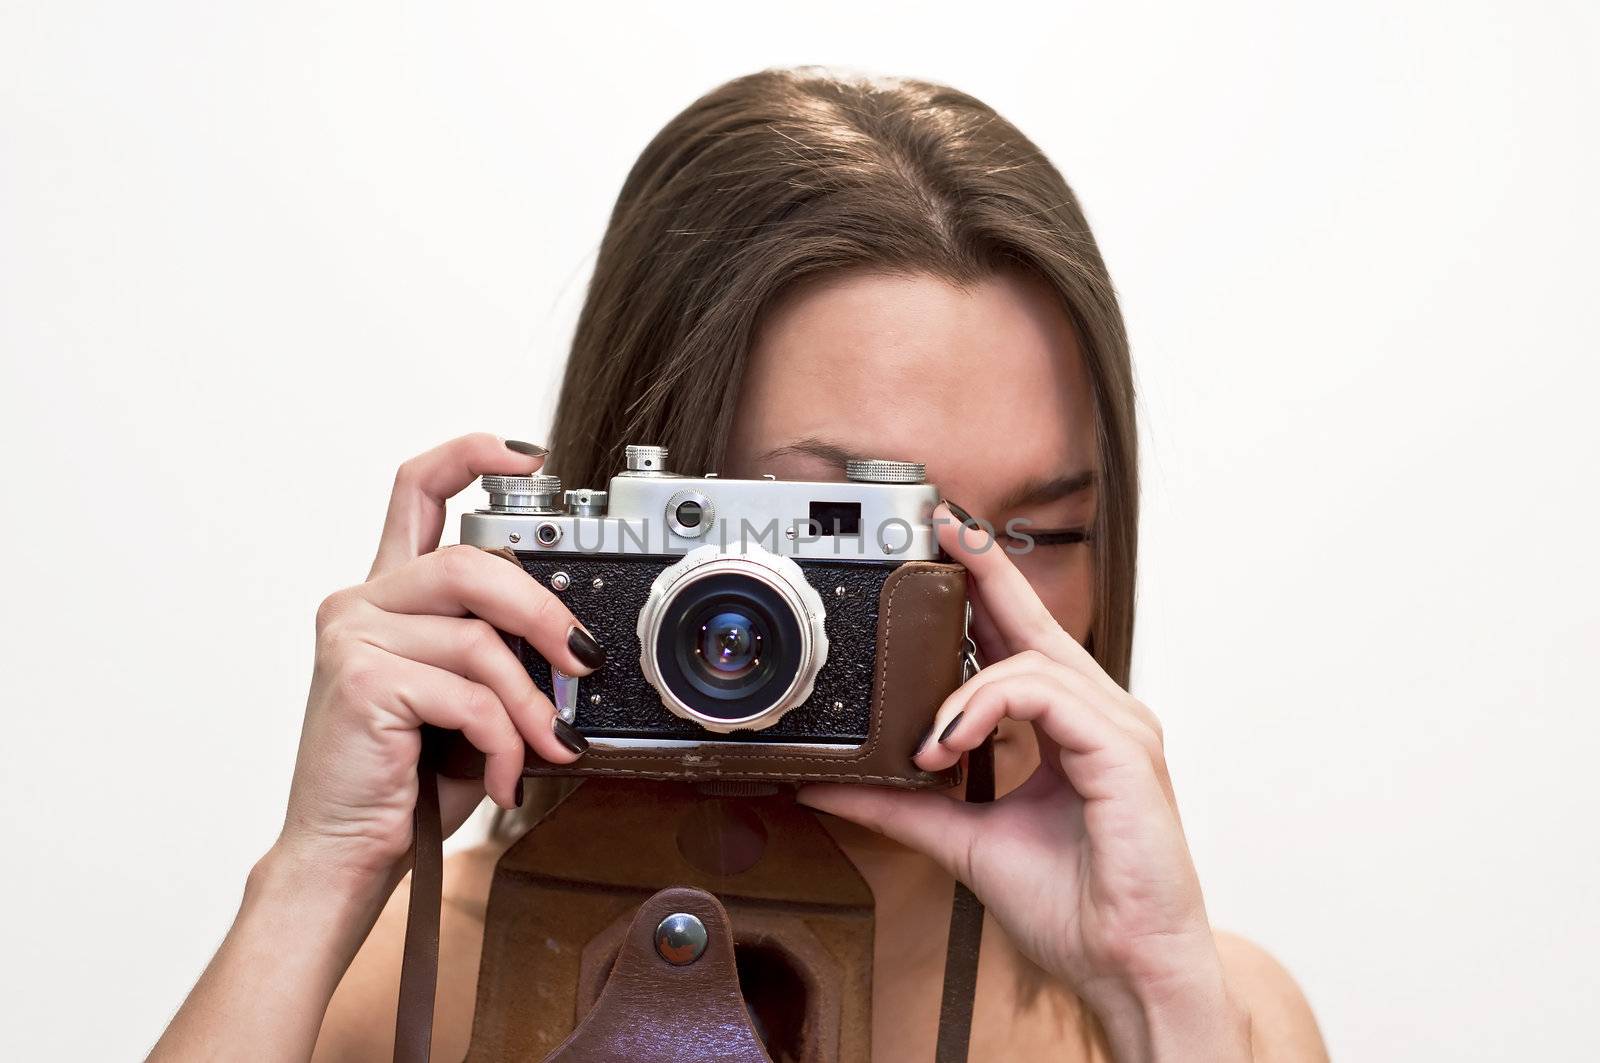 Young woman looks at an old film camera. Studio shot on white background.
